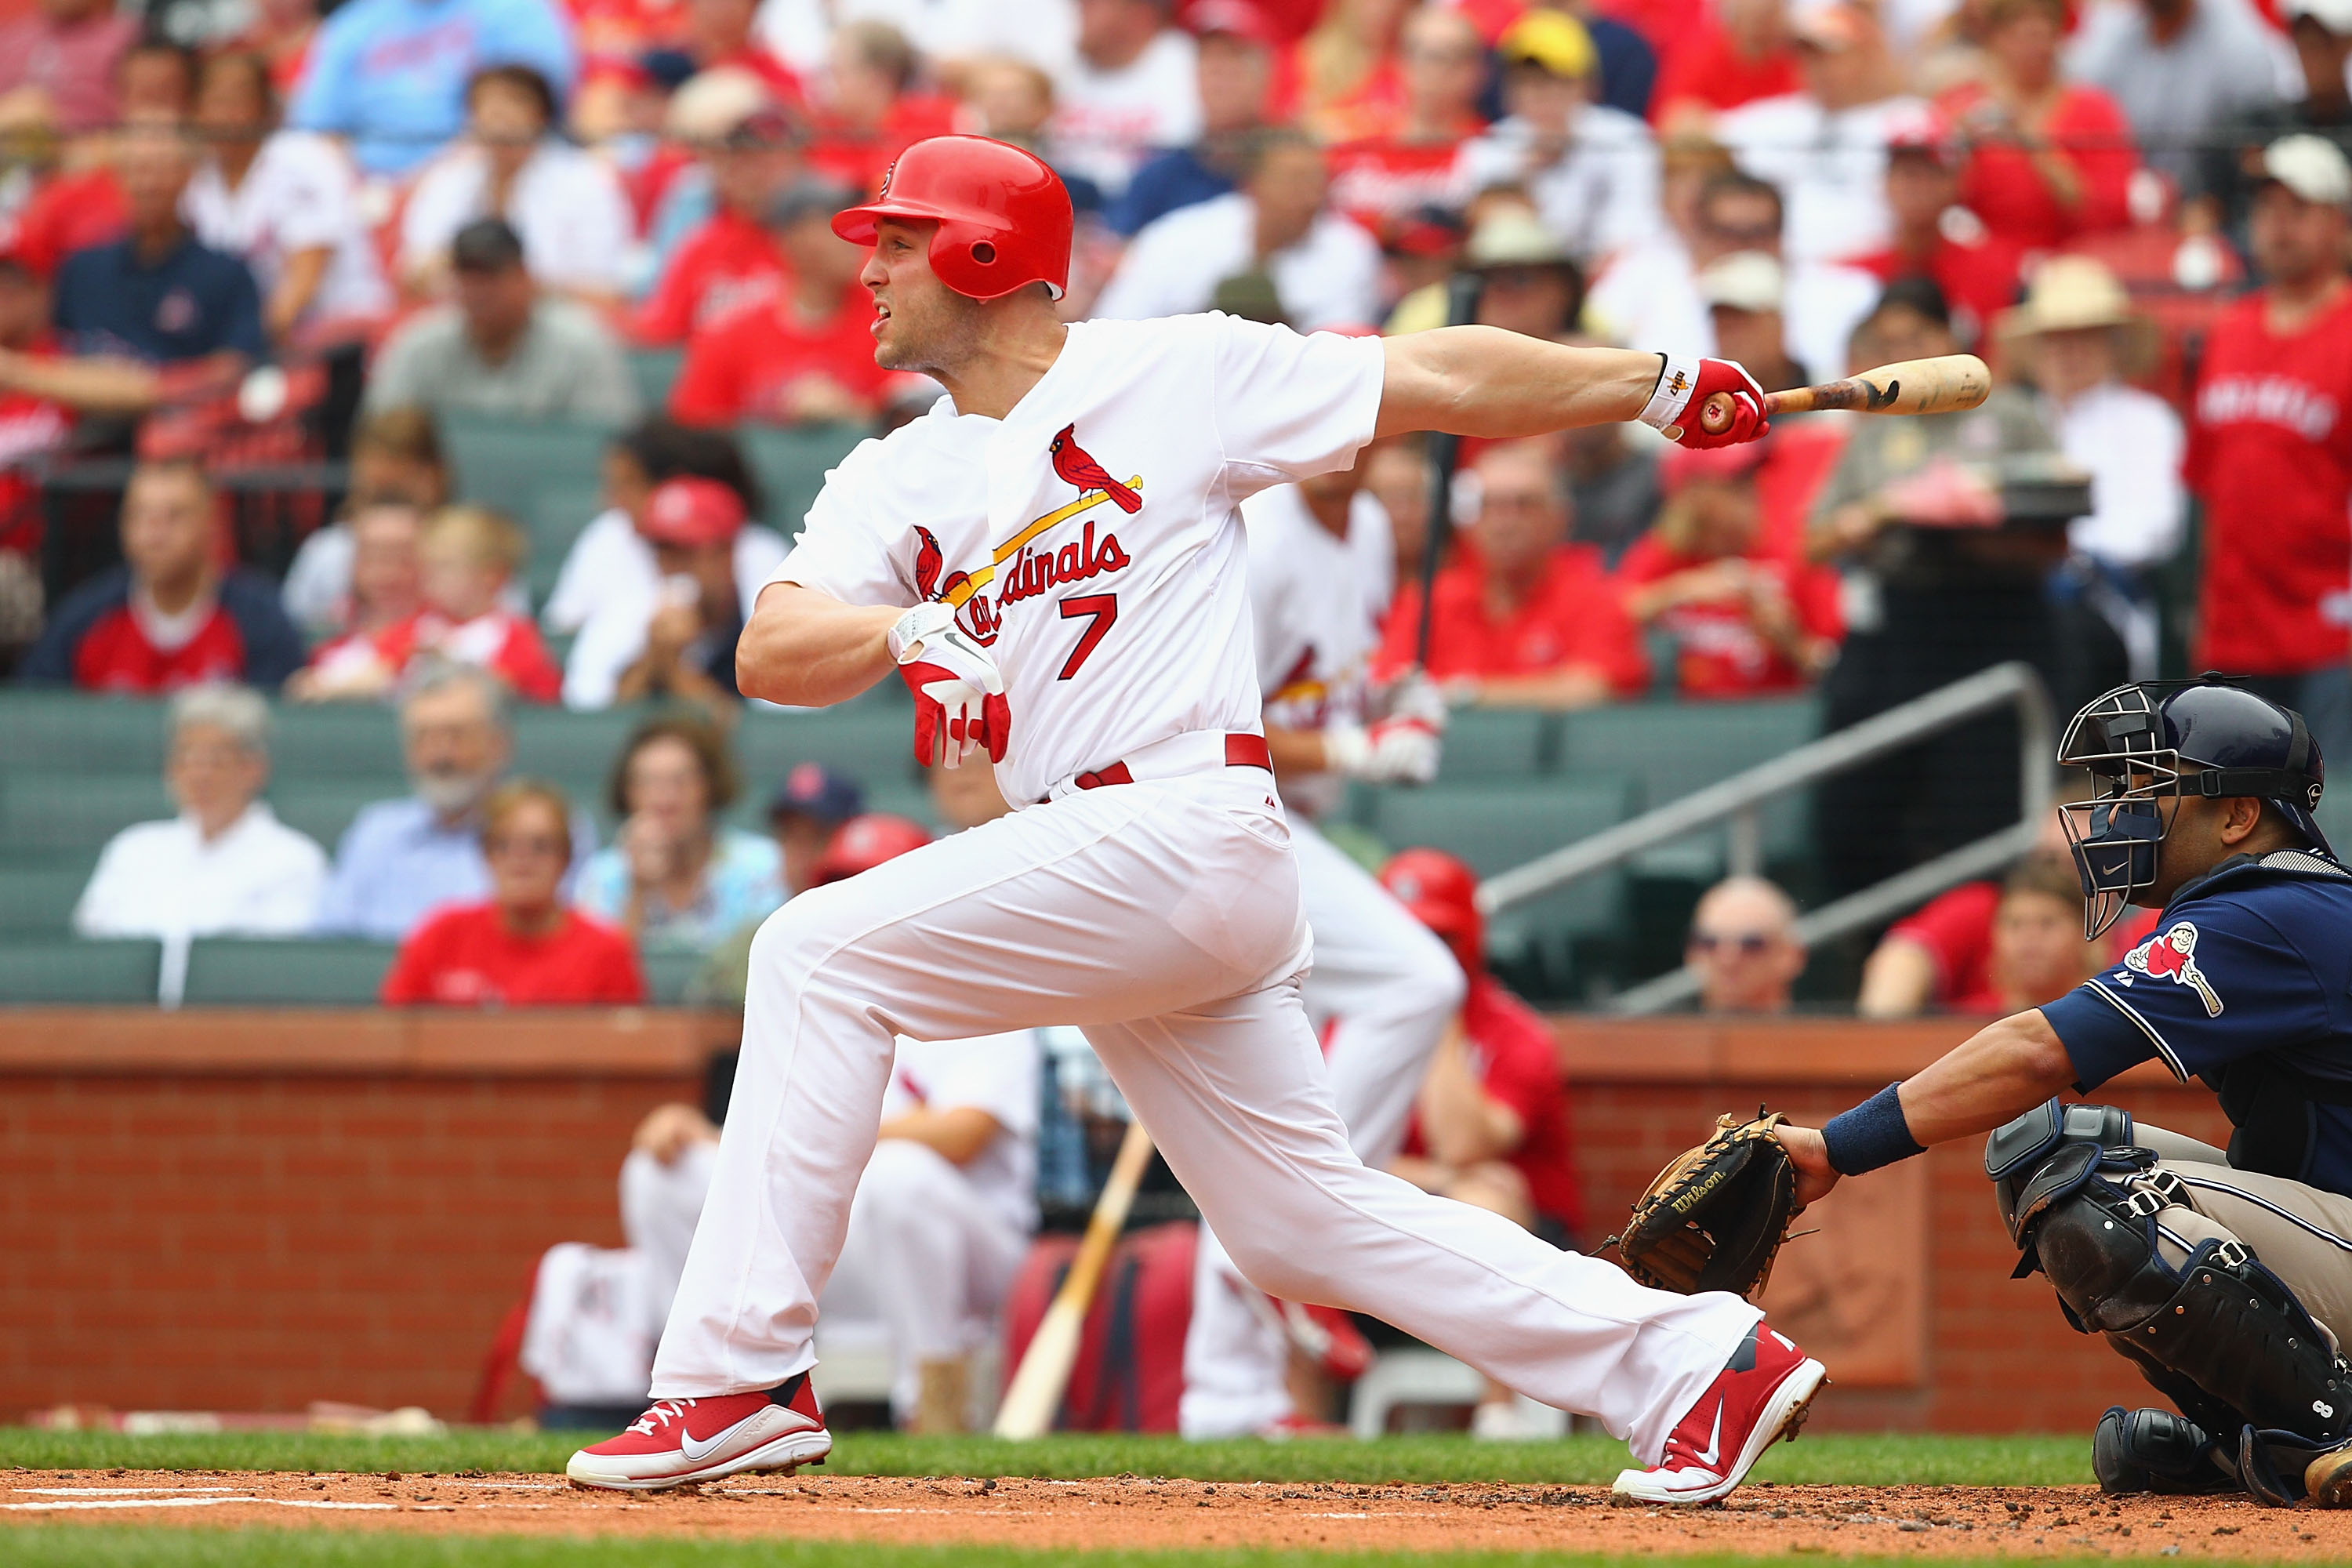 ST. LOUIS - SEPTEMBER 19: Matt Holliday #7 of the St. Louis Cardinals hits an RBI single against the San Diego Padres at Busch Stadium on September 19, 2010 in St. Louis, Missouri.  The Cardinals beat the Padres 4-1.  (Photo by Dilip Vishwanat/Getty Image